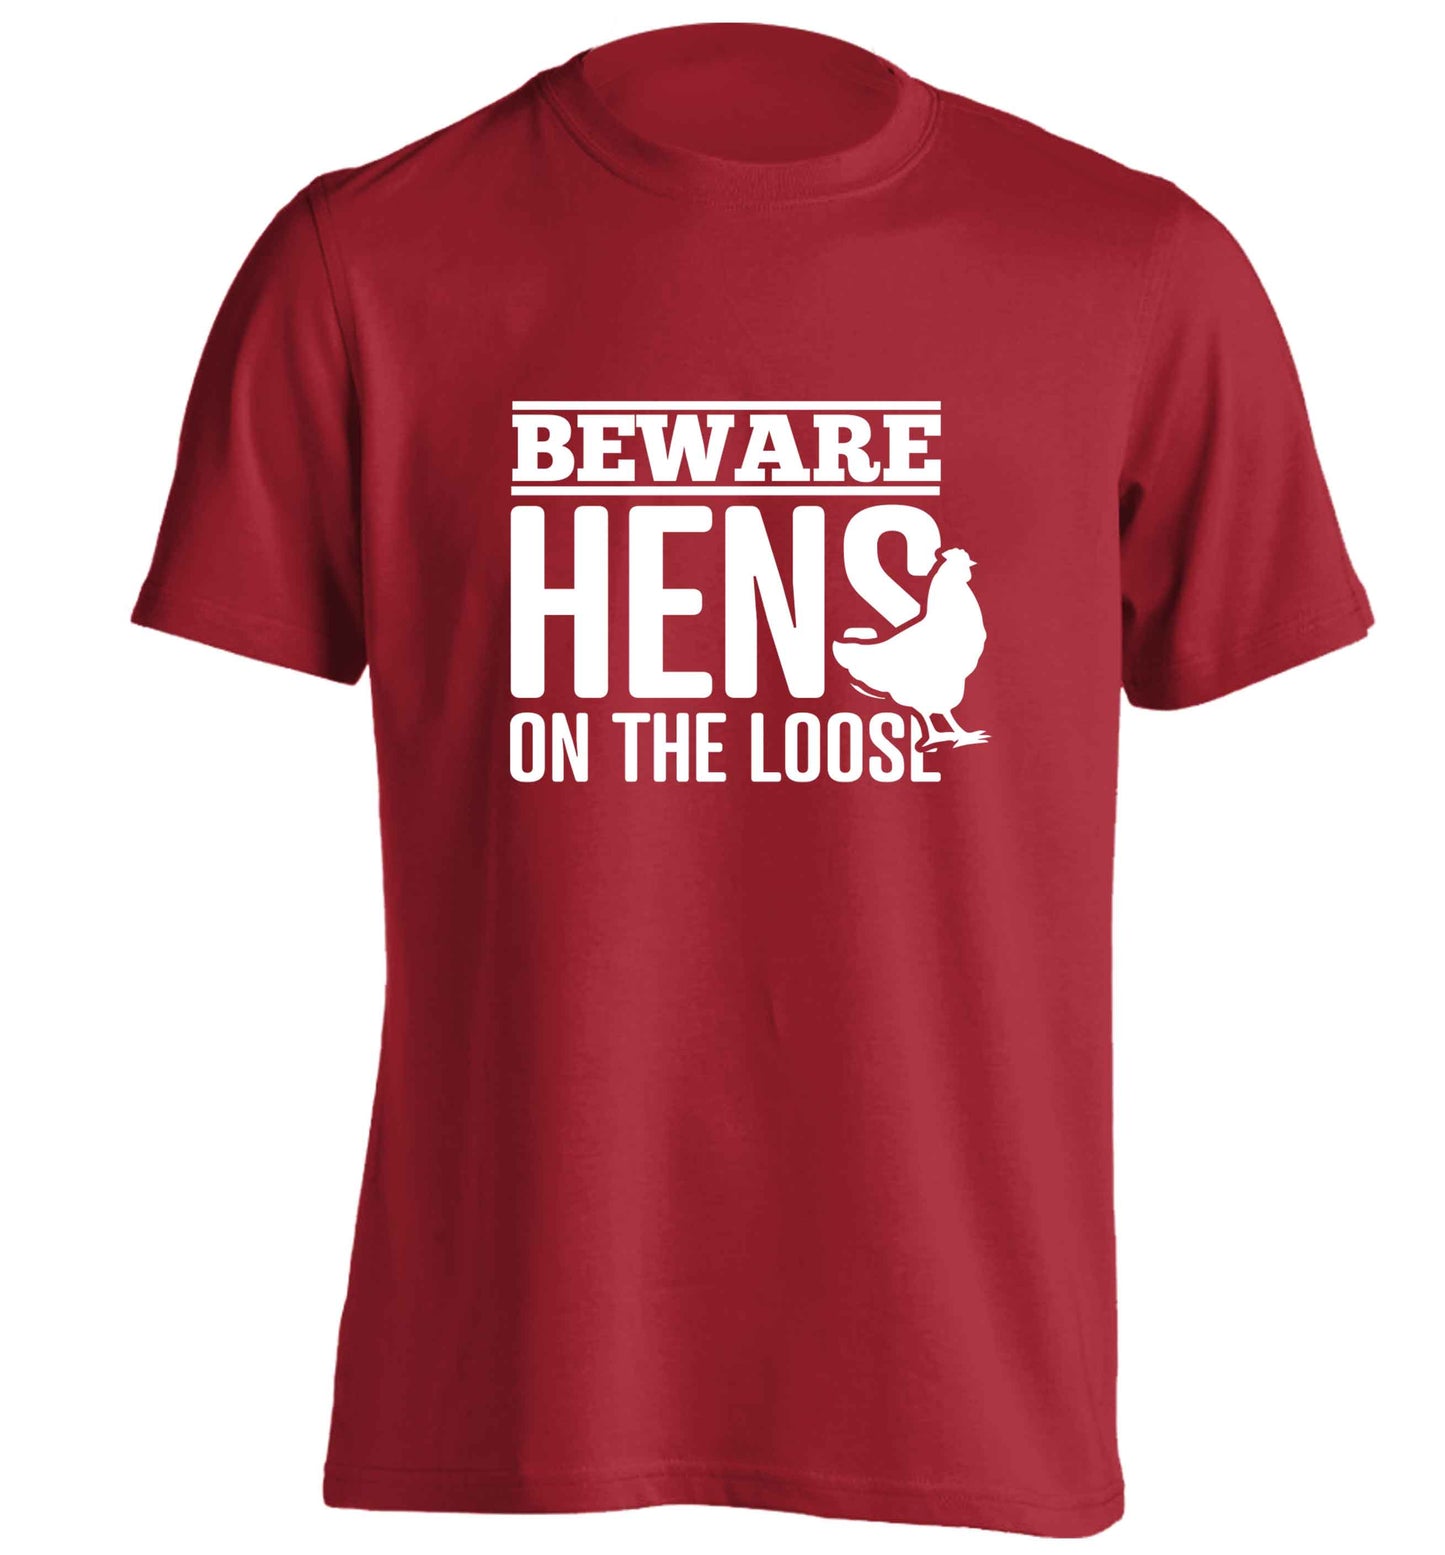 Beware hens on the loose adults unisex red Tshirt 2XL